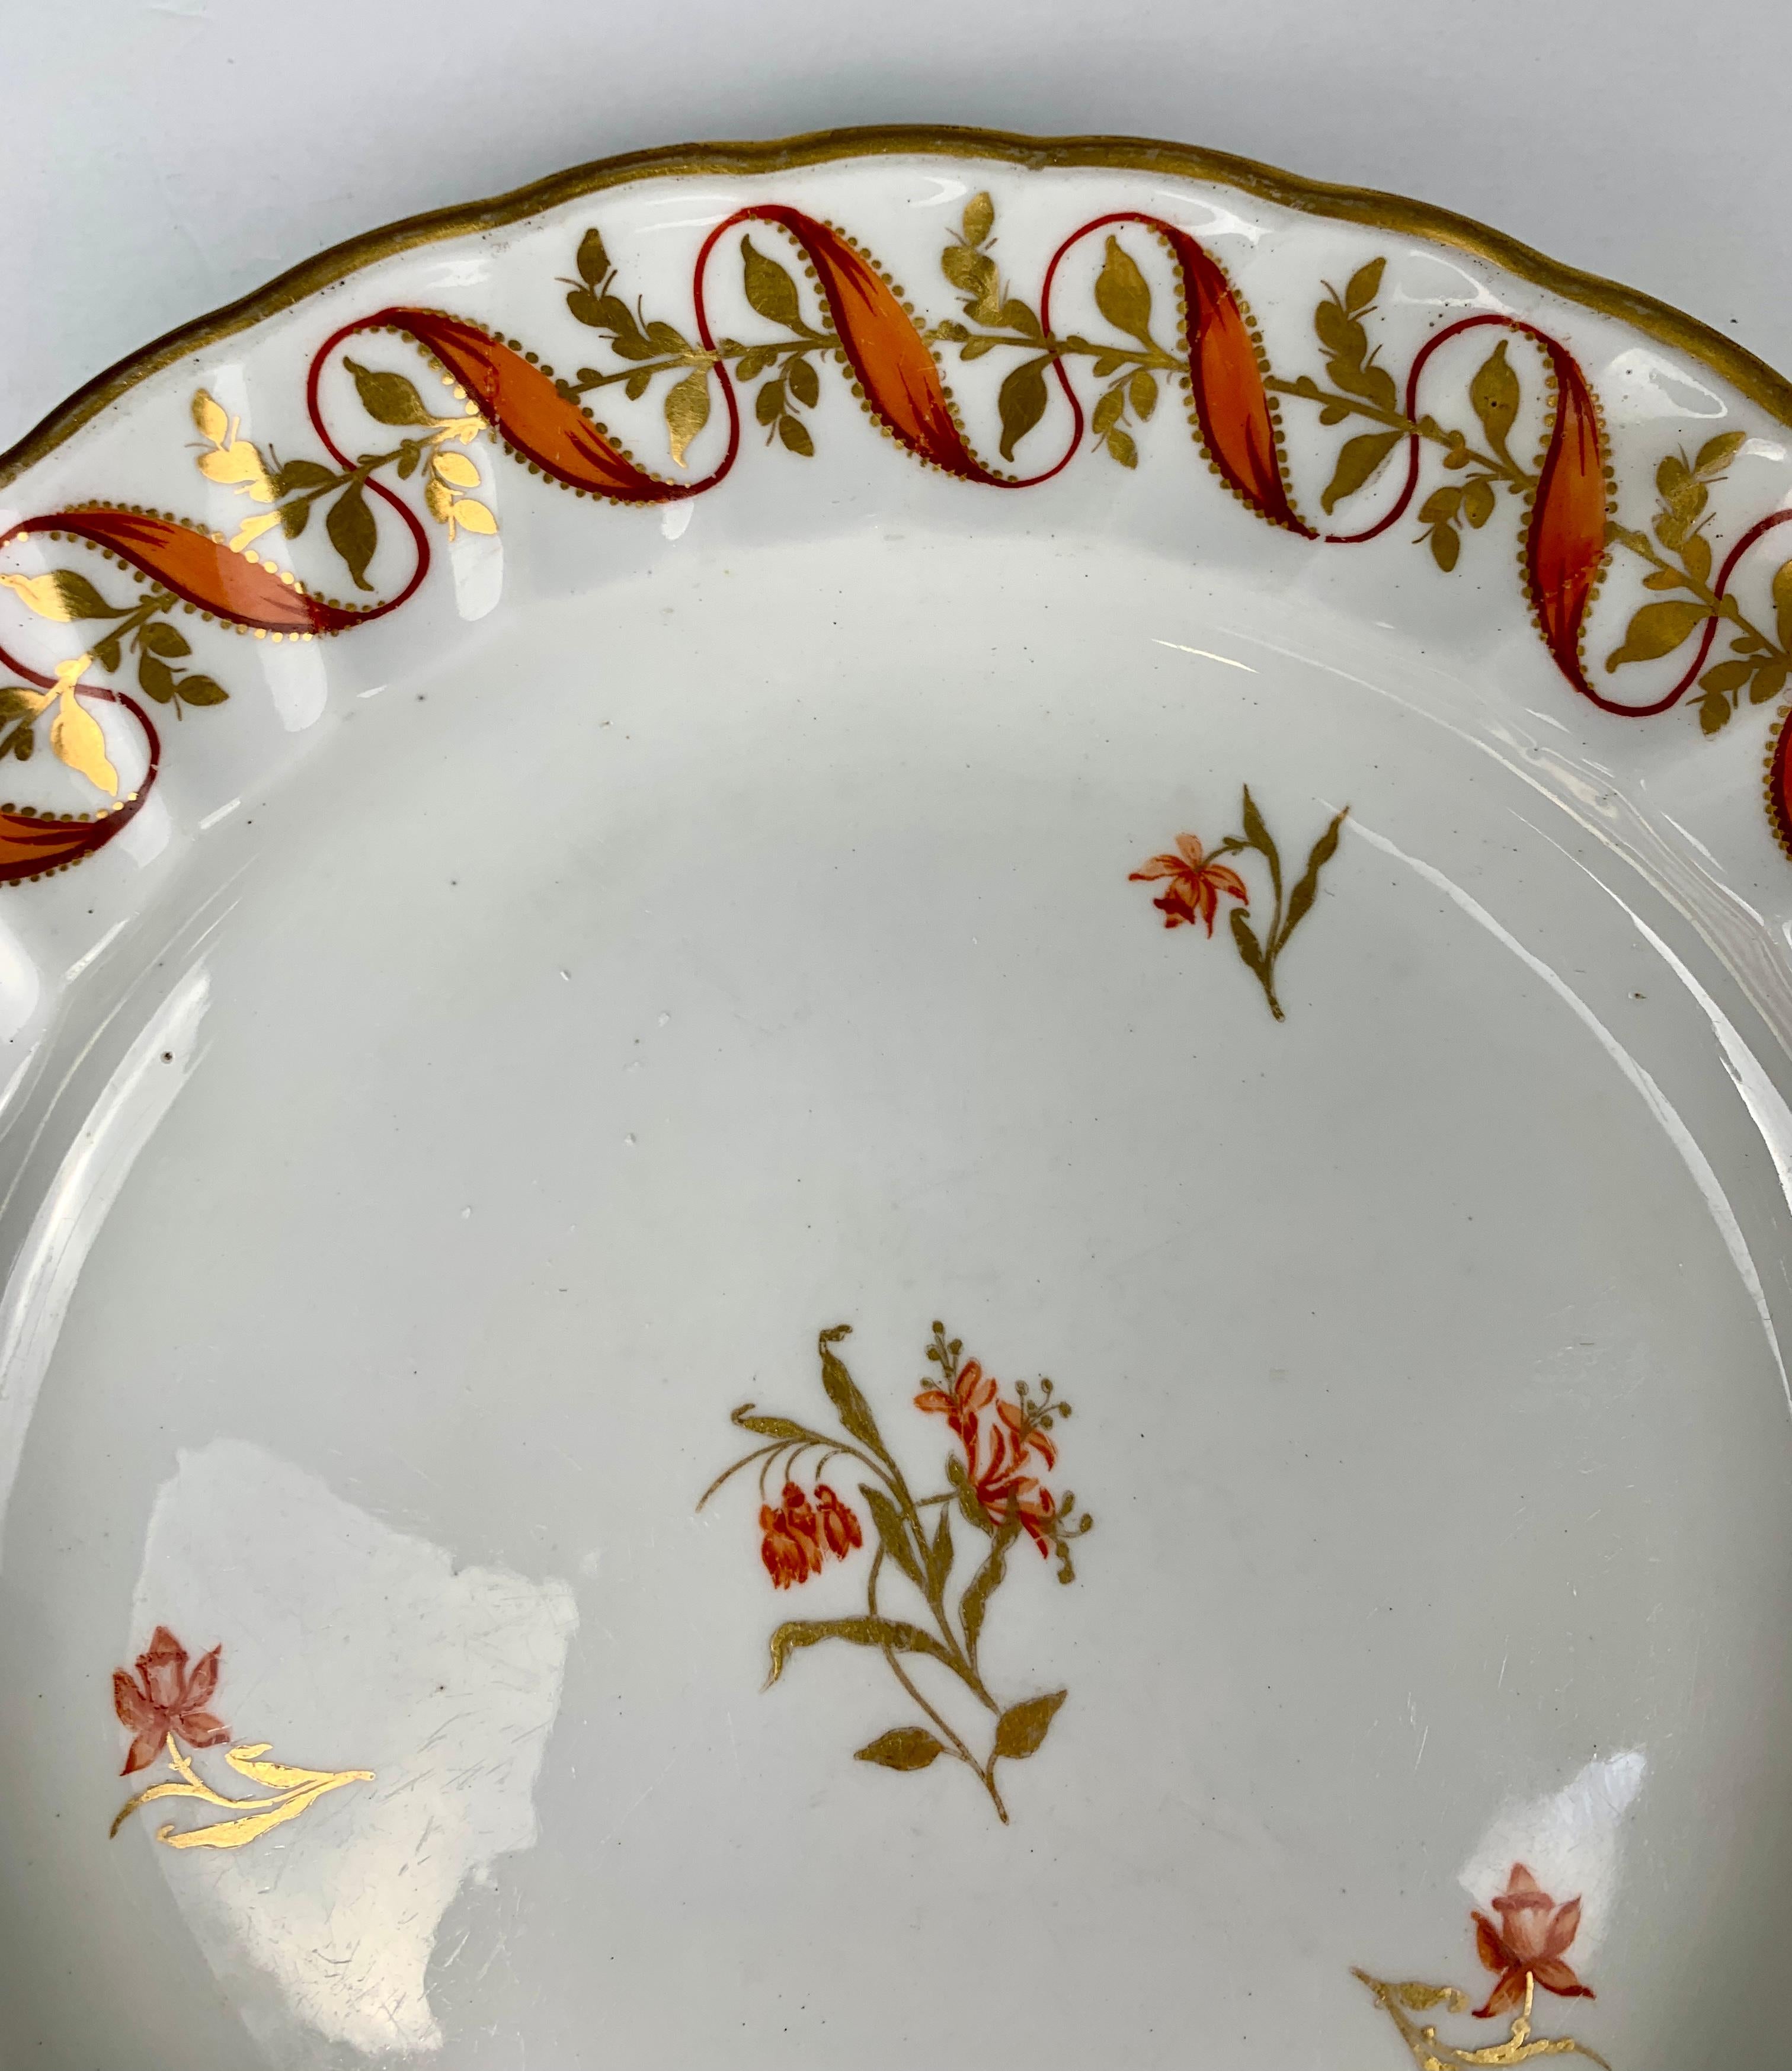 Set Four Antique Porcelain Dishes Hand-Painted 18th Century England, circa 1790 For Sale 1